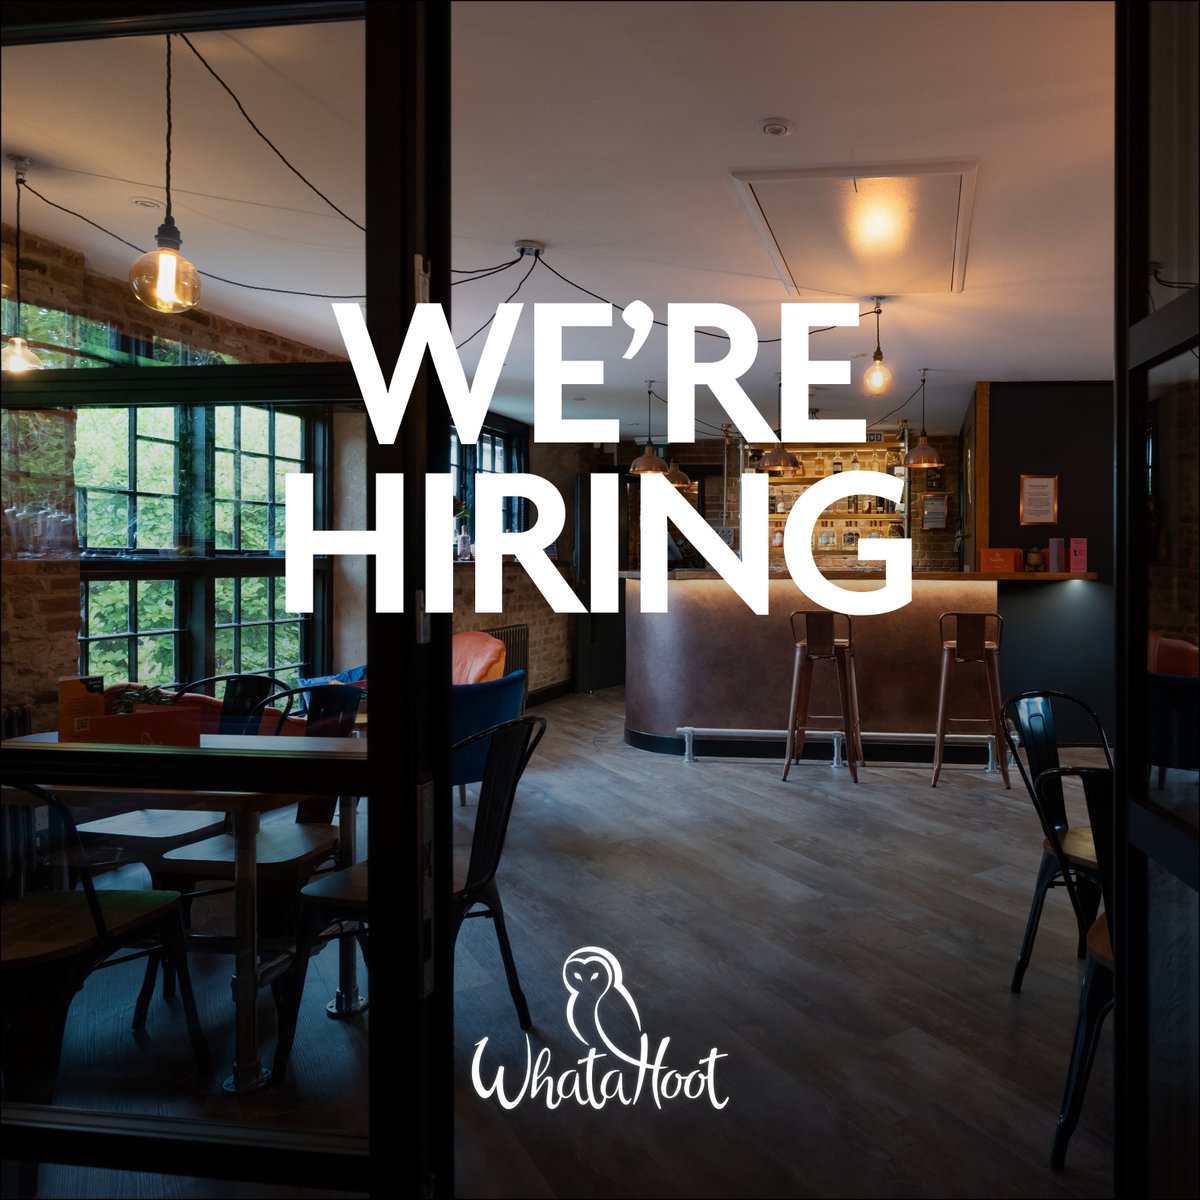 WE’RE HIRING!!🦉 Would you like to join our Bar Team? We are looking for a bartender, part time, with some bar/hospitality experience. For more information email us at nicky@whatahoot.co.uk #whatahoot #nowhiring